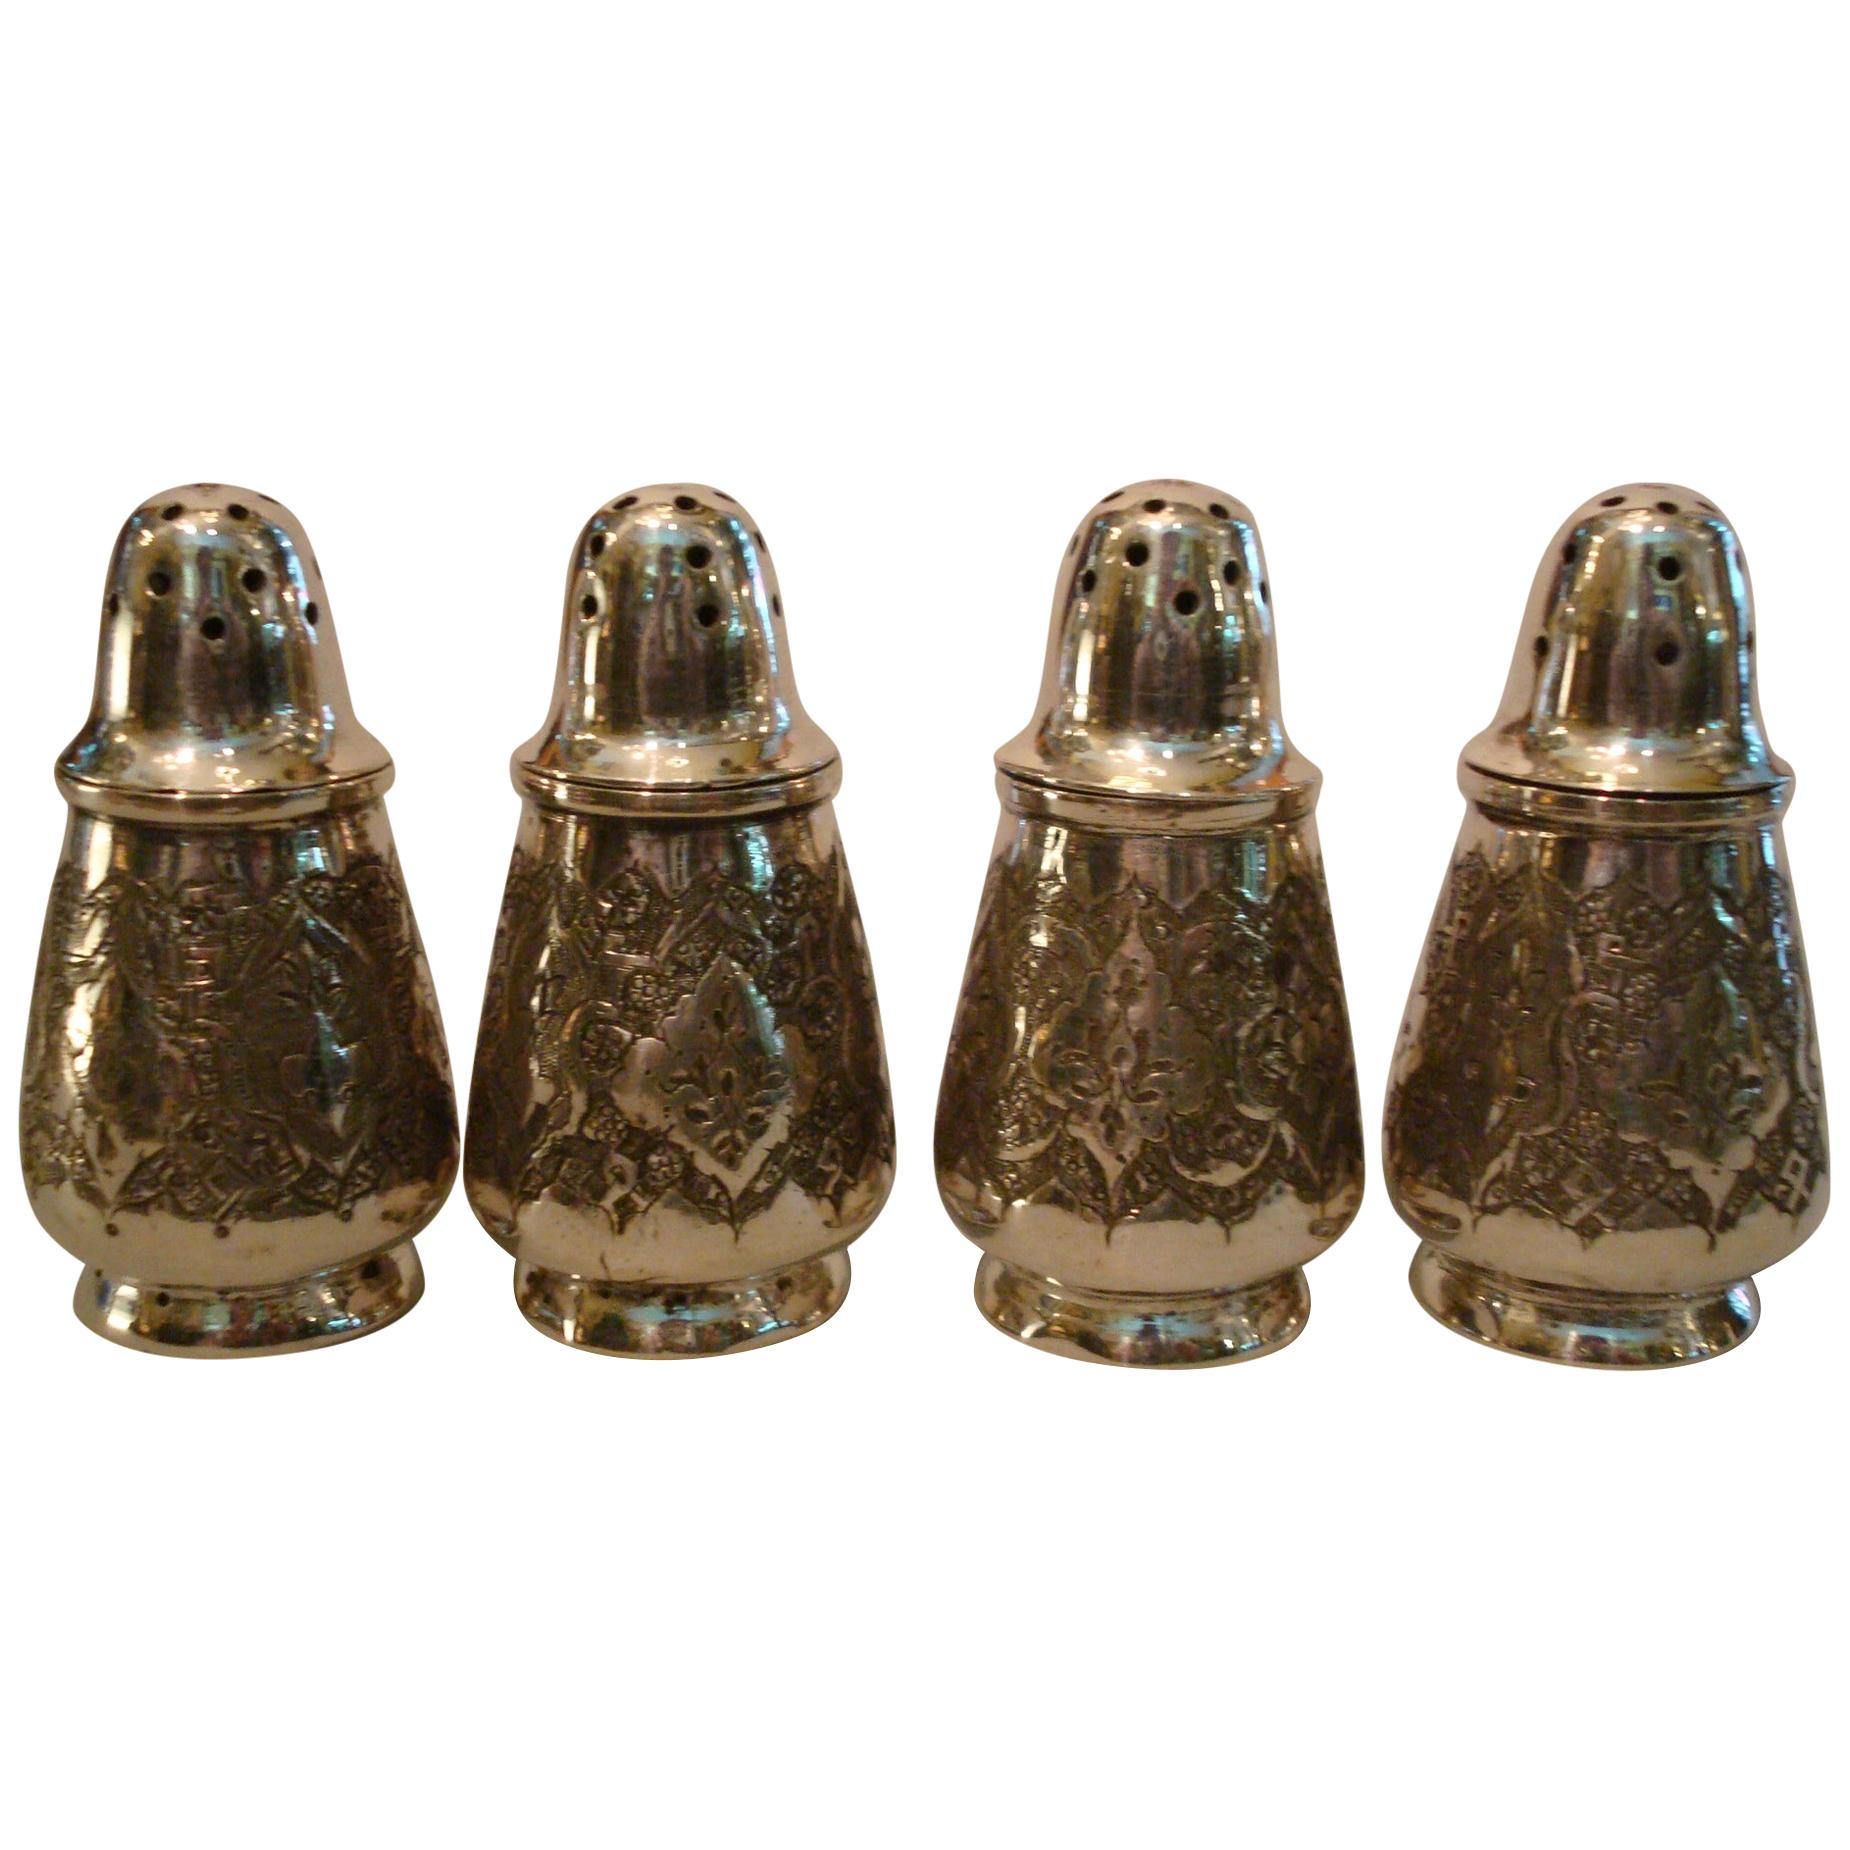 Four Engraved Russian Sterling Silver Salt and Pepper Shakers